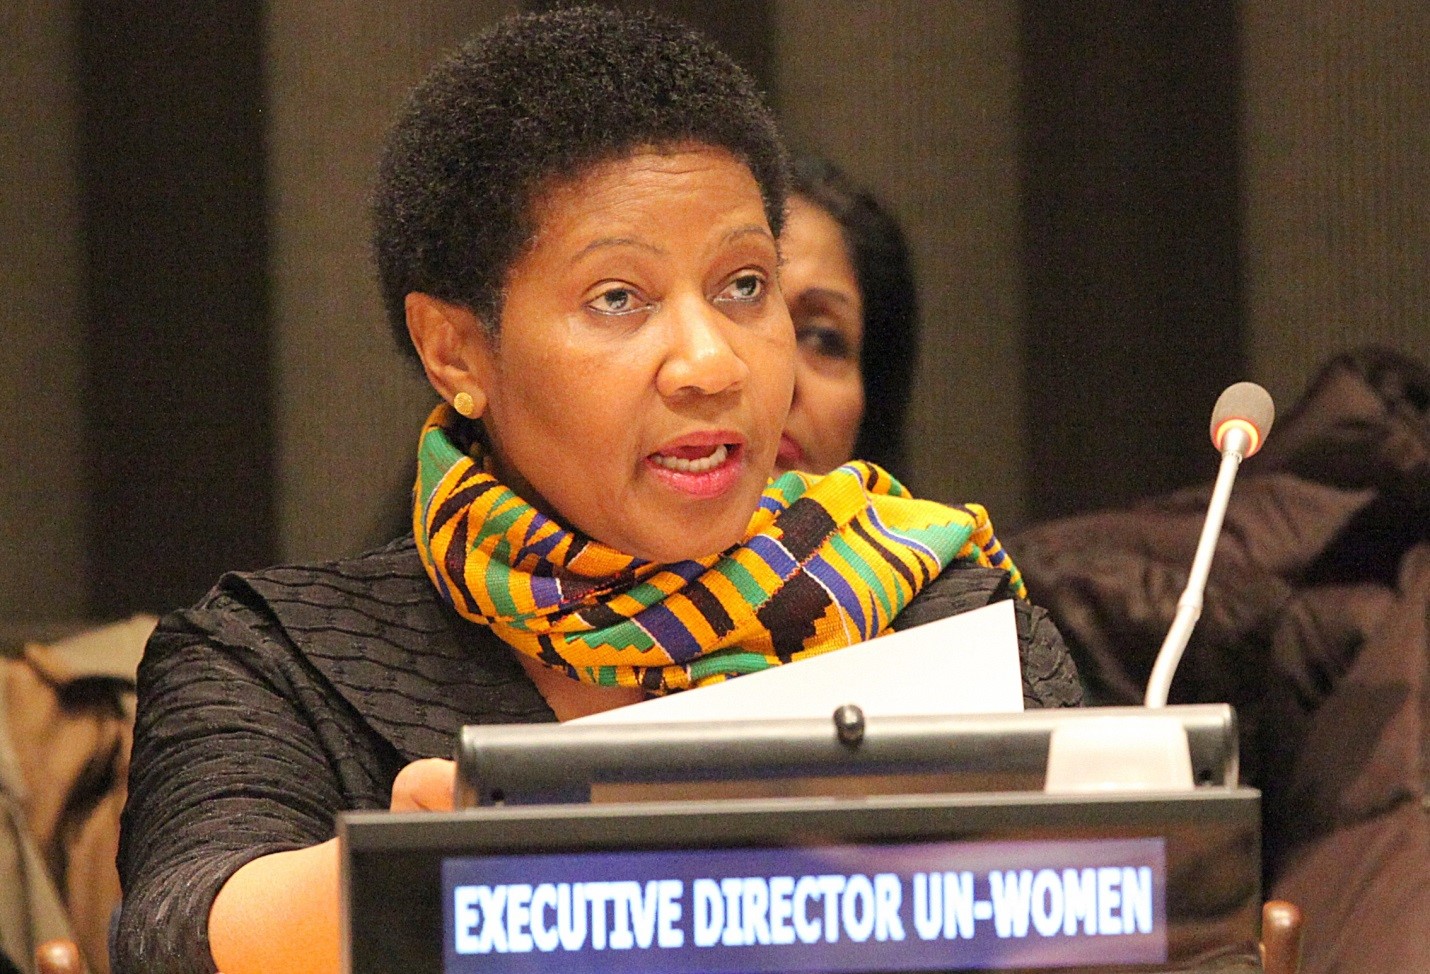 Nigeria: UN Backs Up Women to Take Over Political Positions